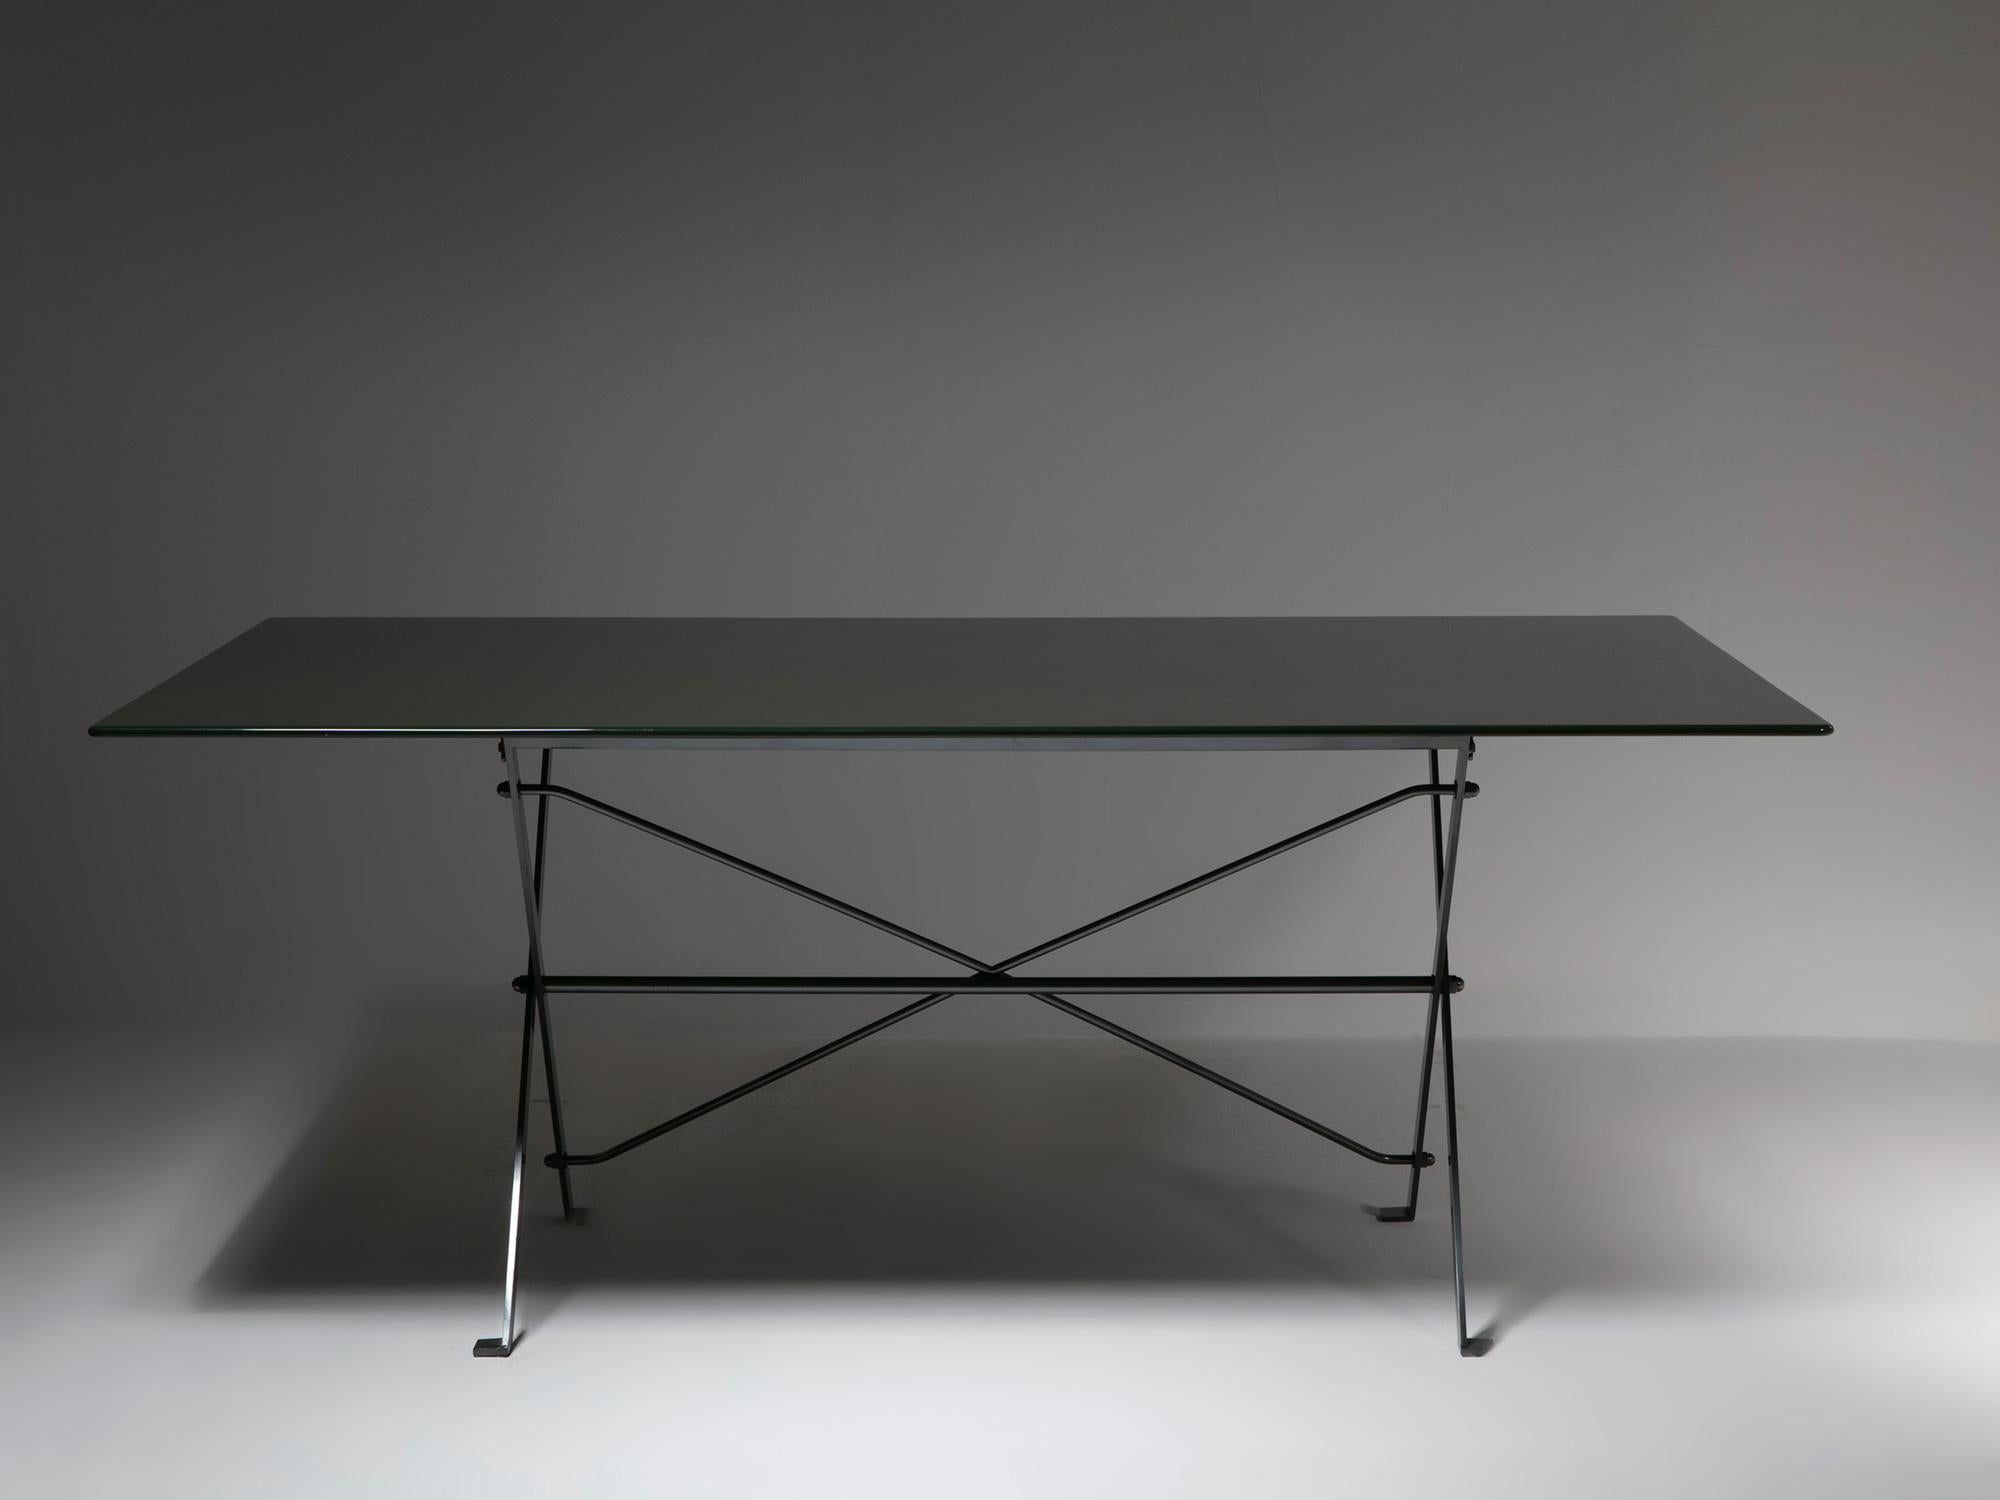 Table model T3 by Luigi Caccia Dominioni for Azucena.
Dark green lacquered top and burnished steel folding trestle. 